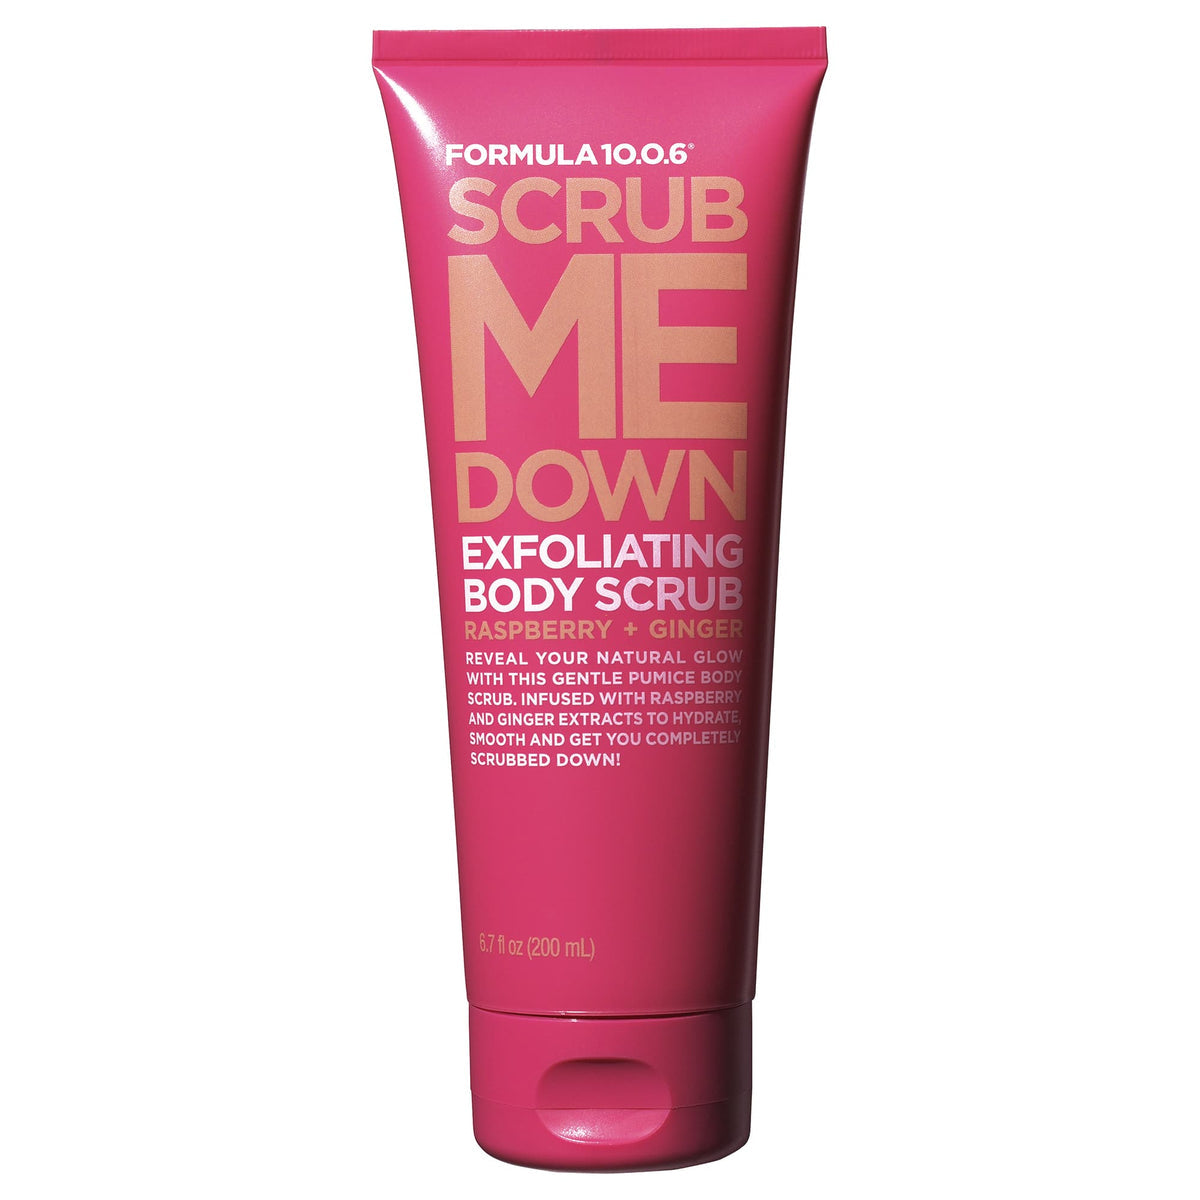 One Smooth Operator - Pore Clearing Face Scrub – Formula 10.0.6